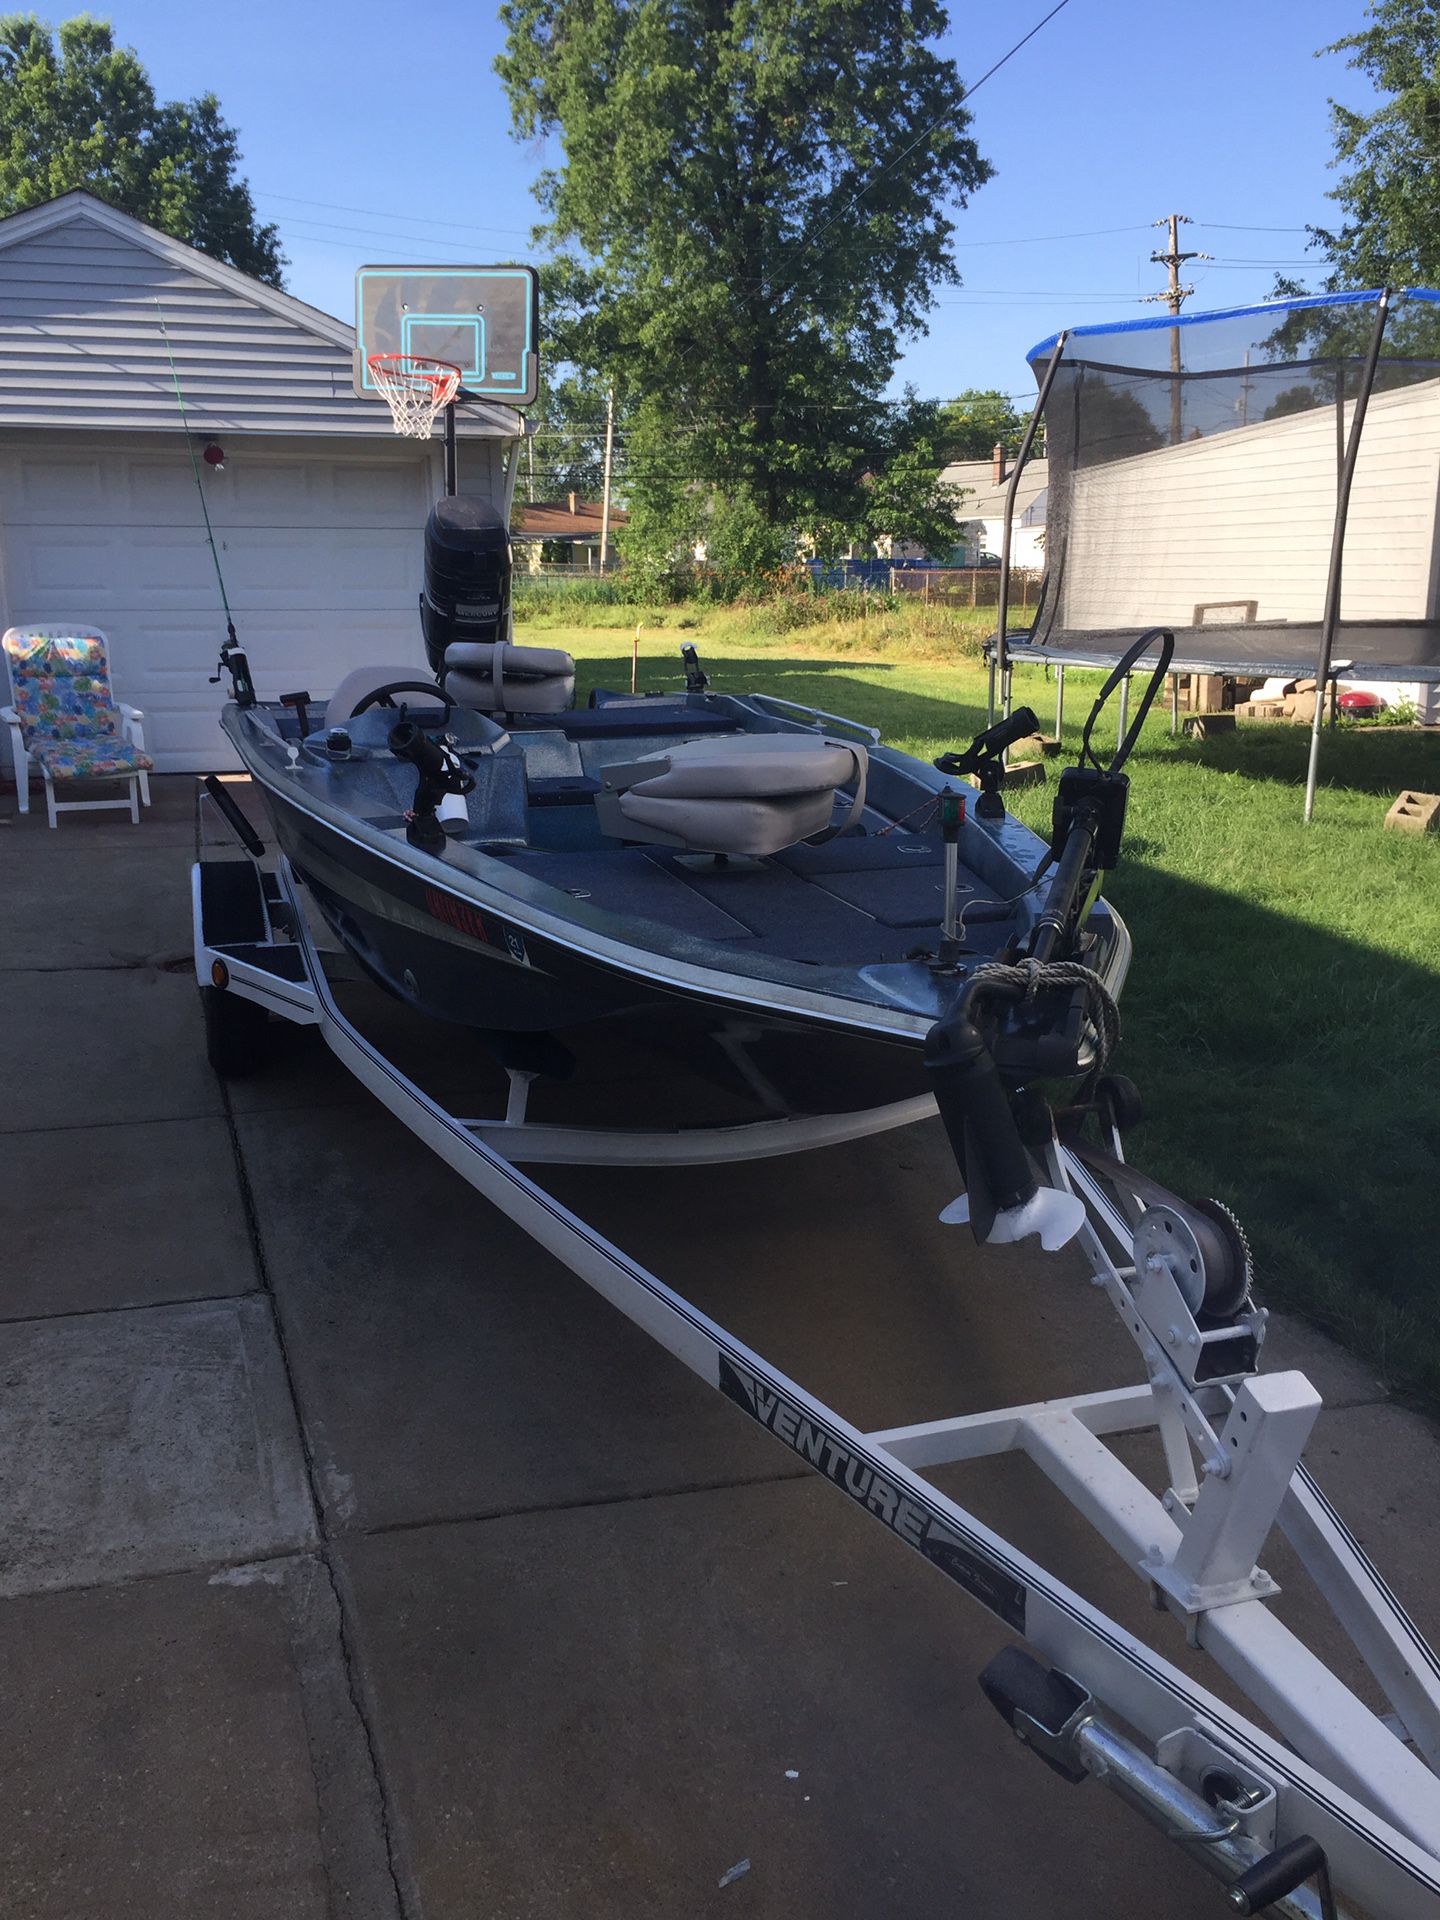 1989 venture 115 hp mercury outboard motor with trailer